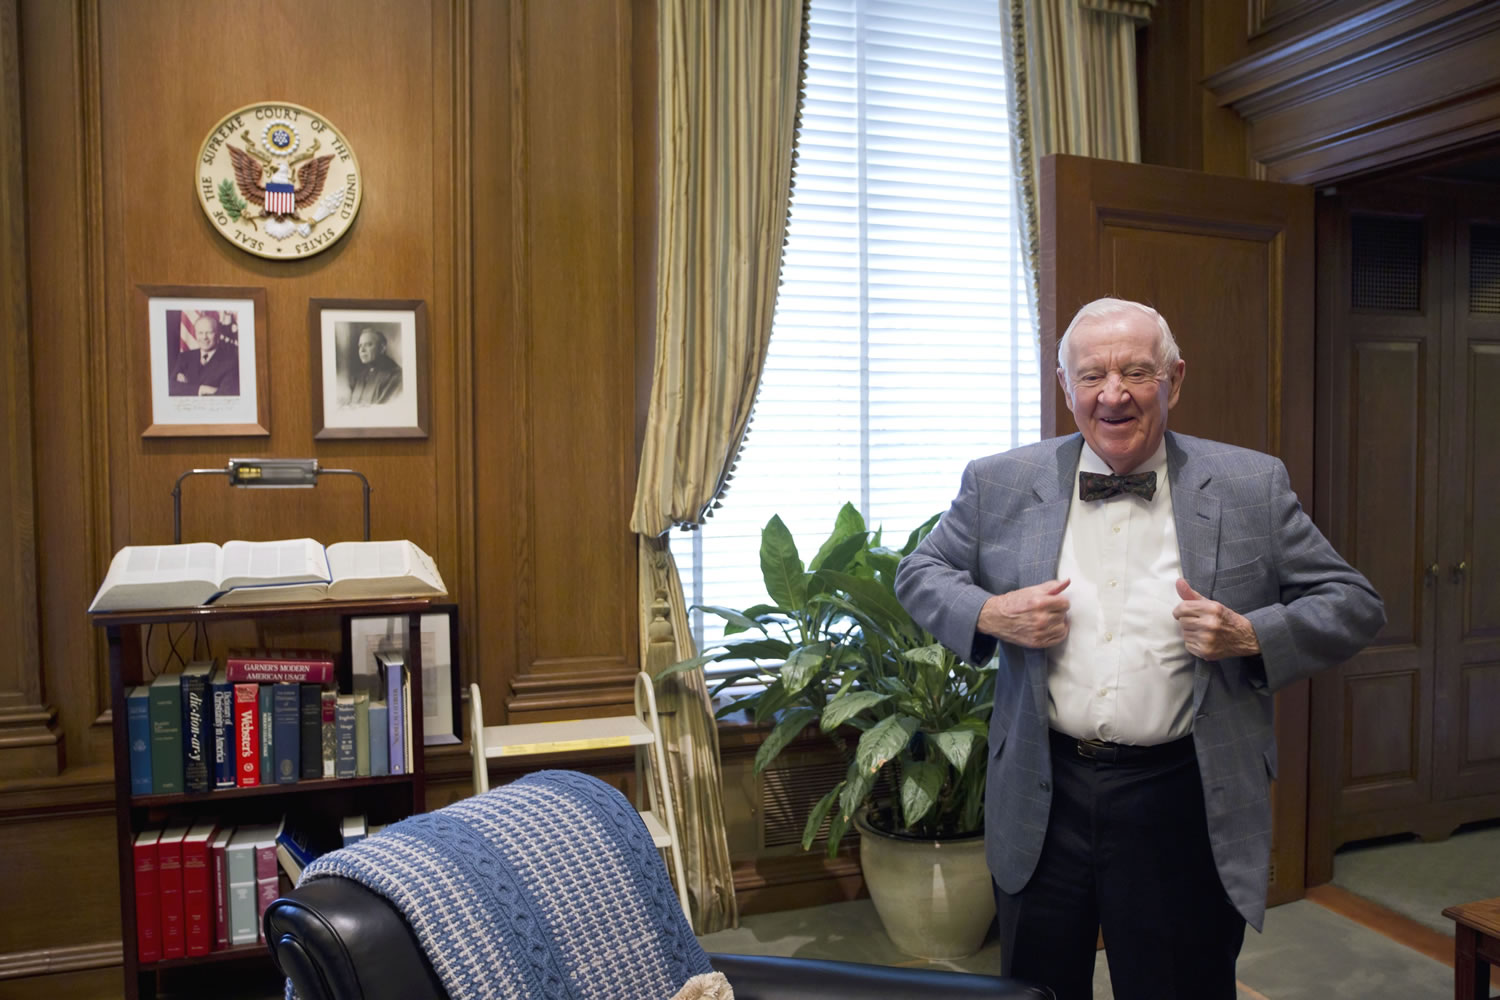 Retired Supreme Court Justice John Paul Stevens said that the justices would not shy away from deciding the case in the middle of a presidential campaign and would be doing the country a service.